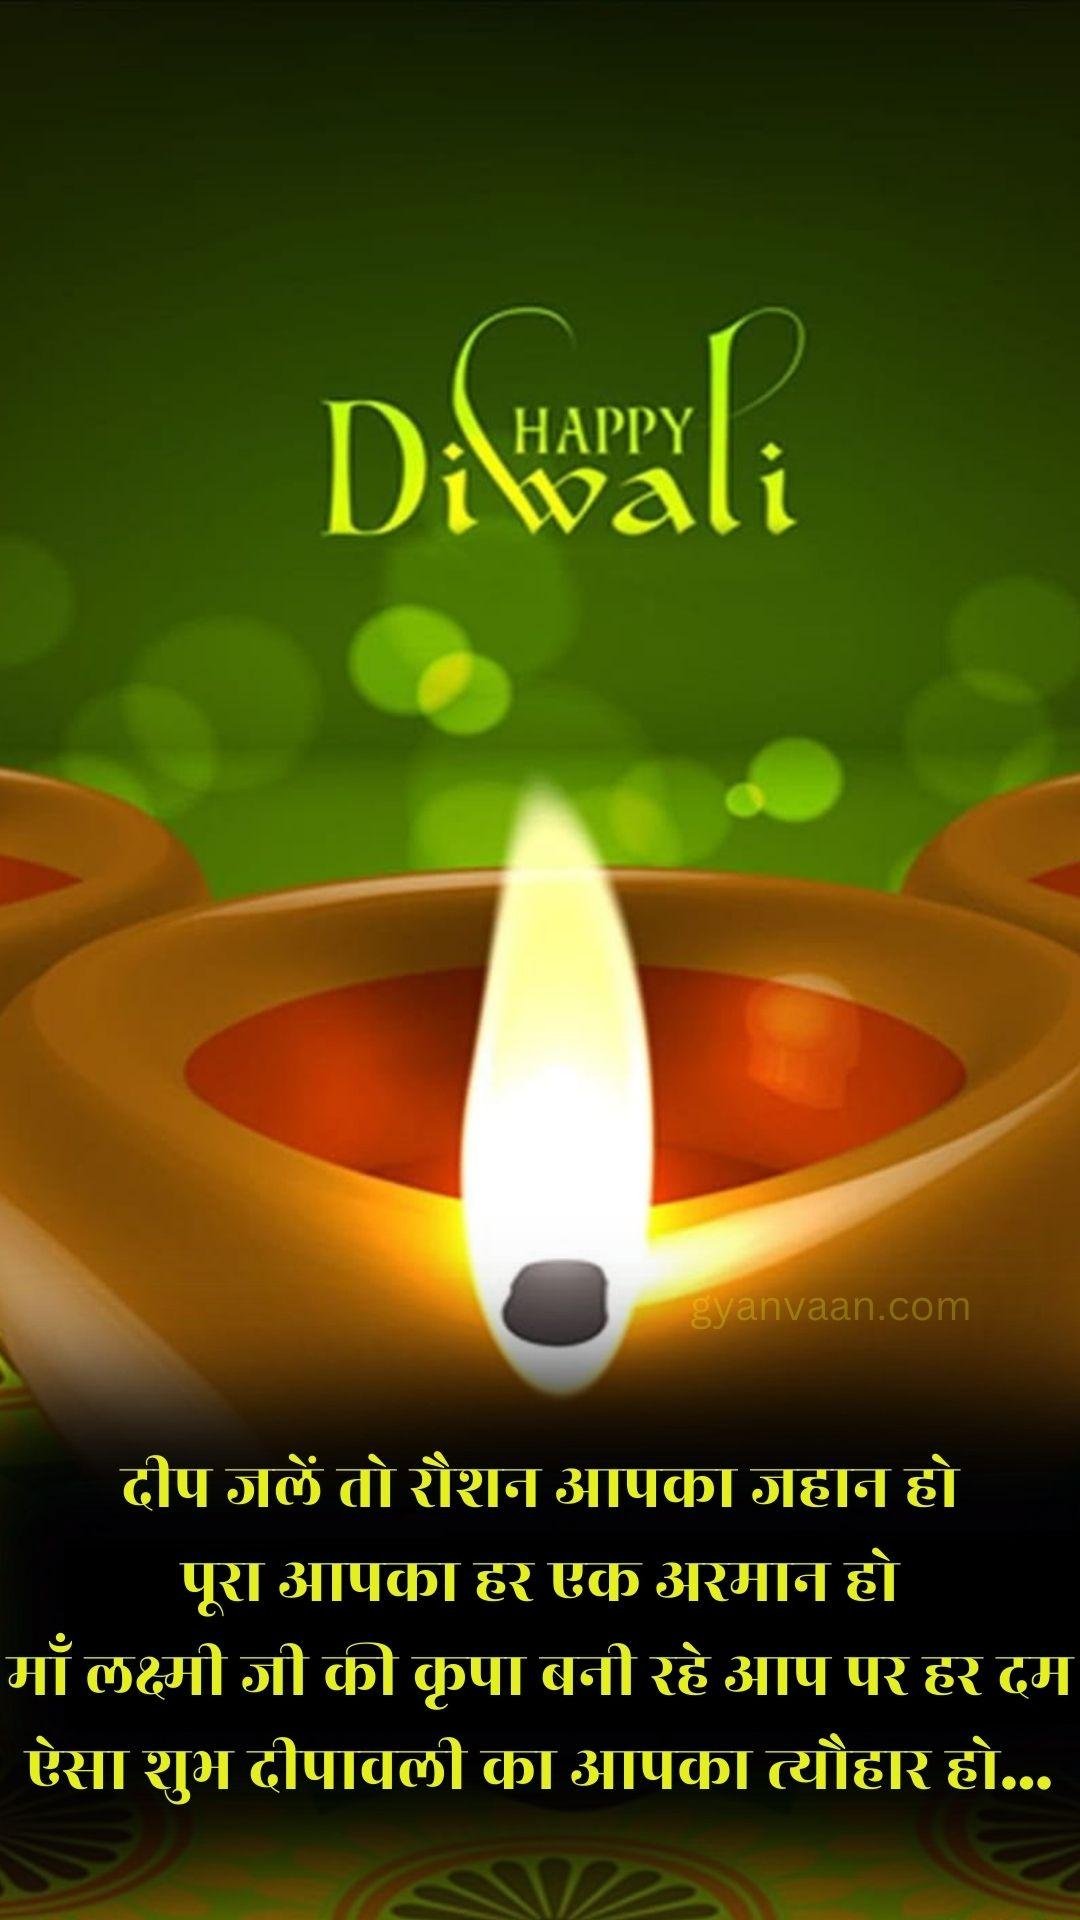 Diwali Quotes In Hindi With Wishes31 - Diwali Quotes In Hindi